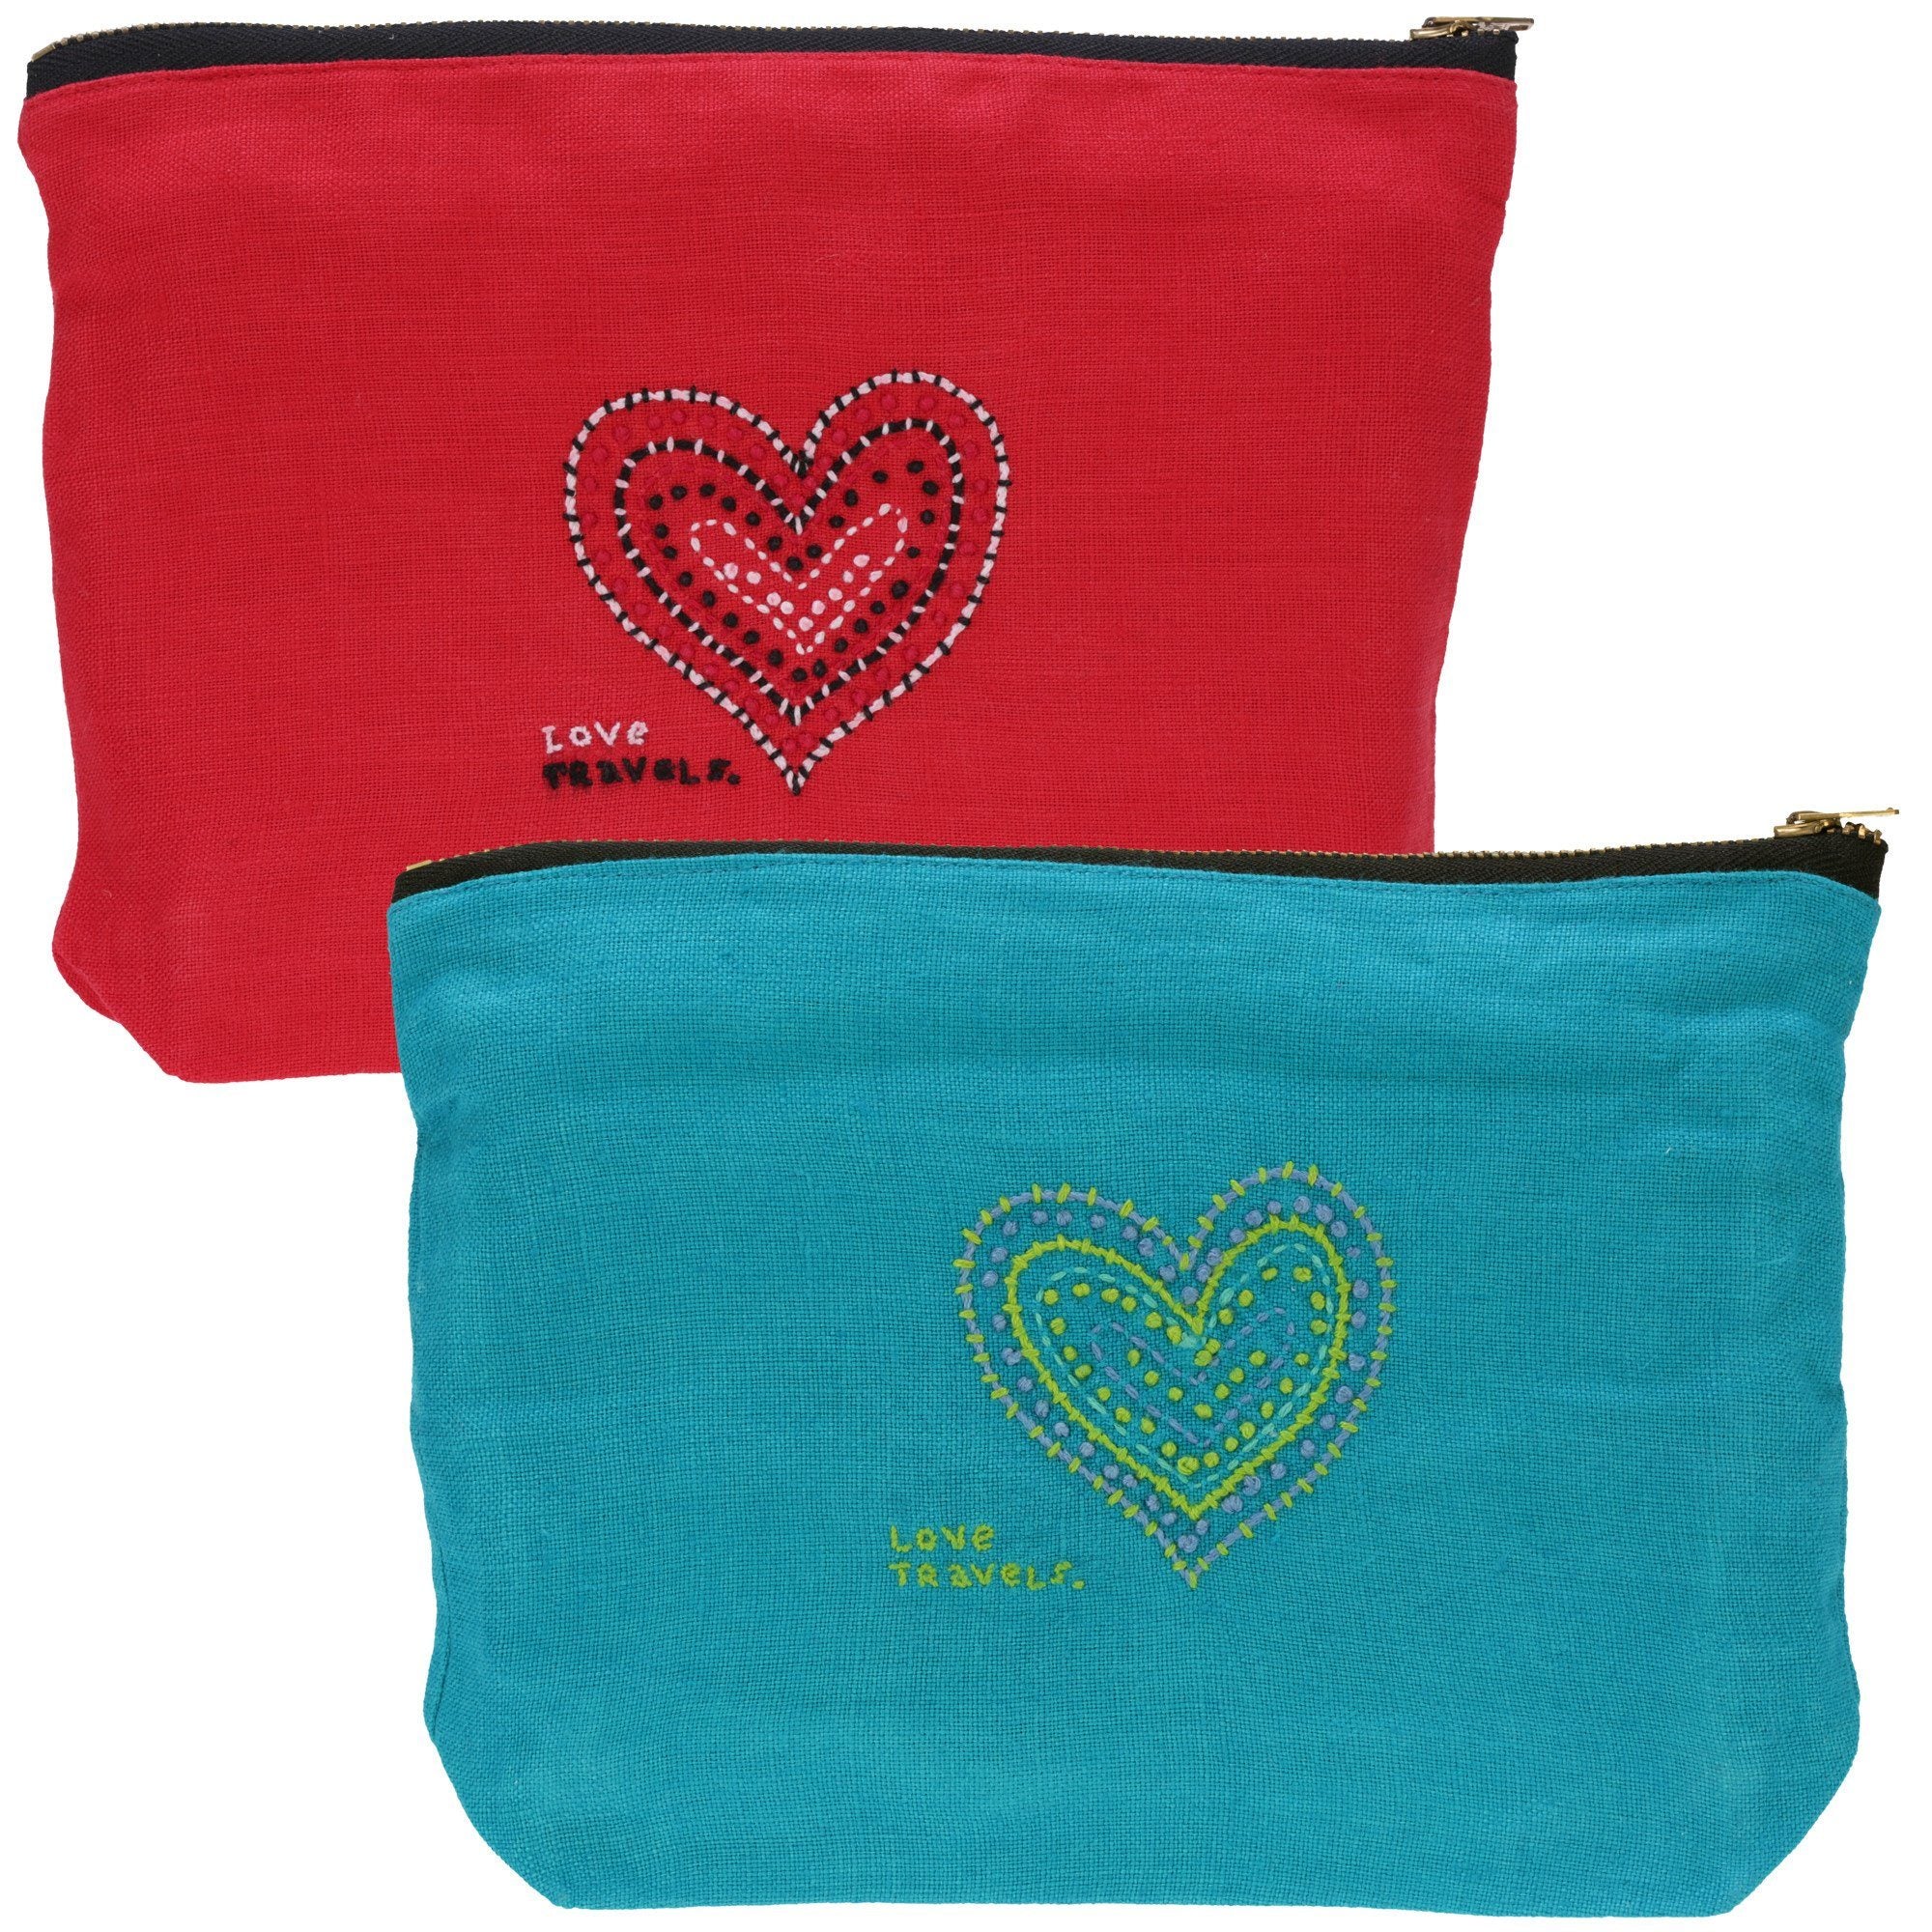 Love Travels Pouch - Turquoise